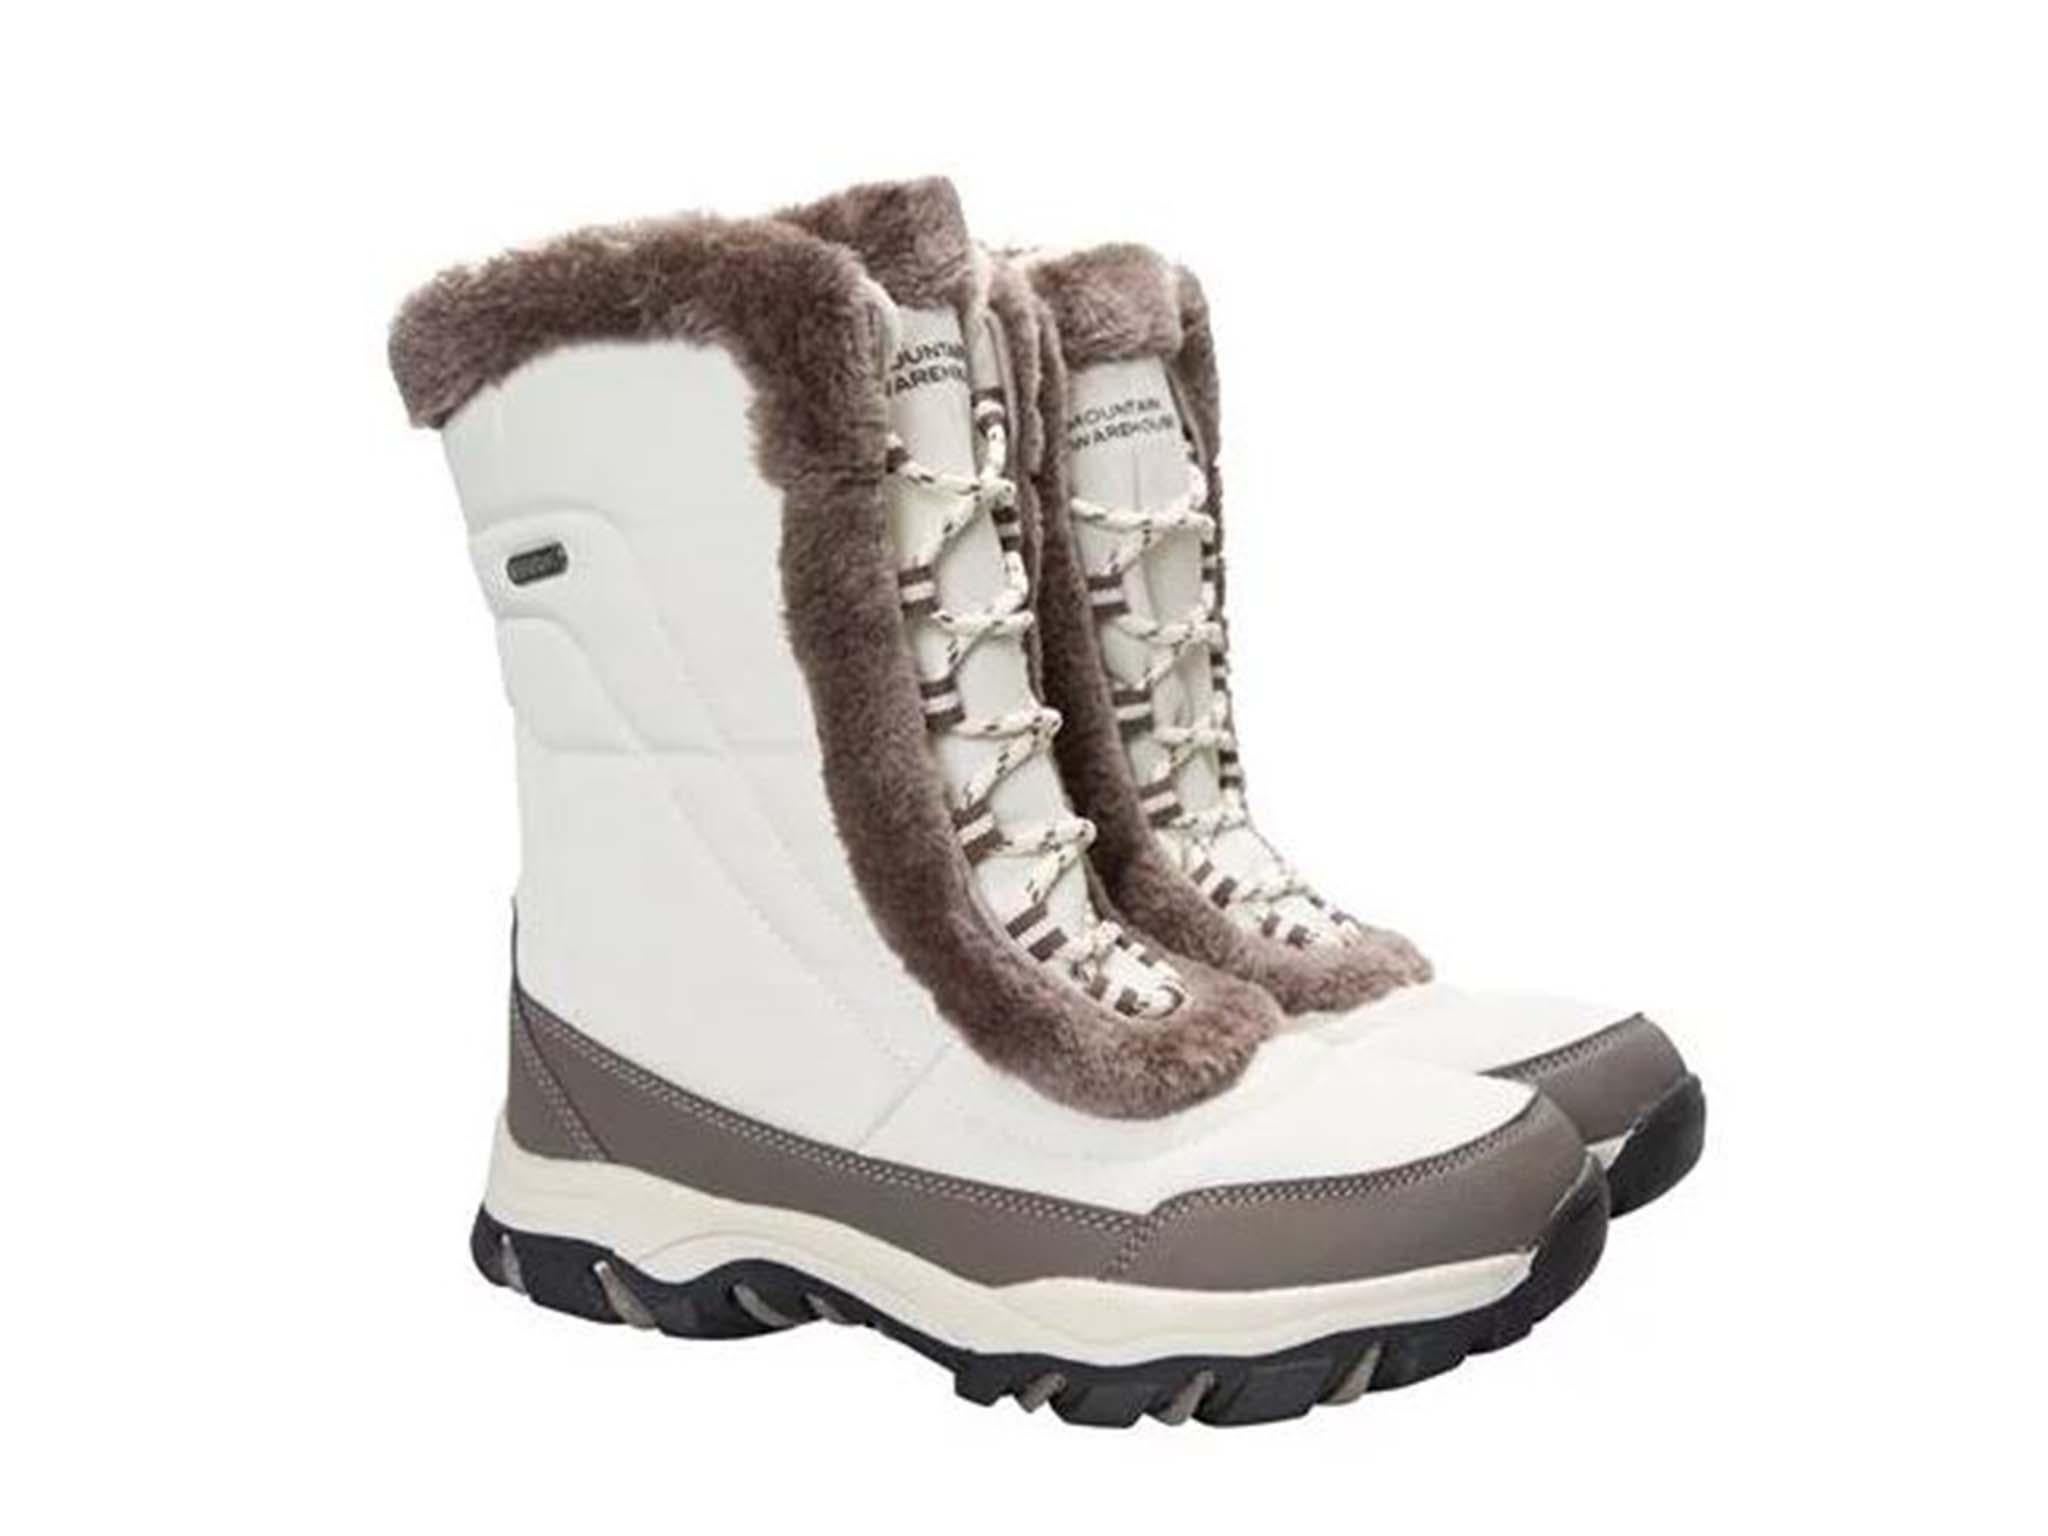 Best women's snow boots to keep your 